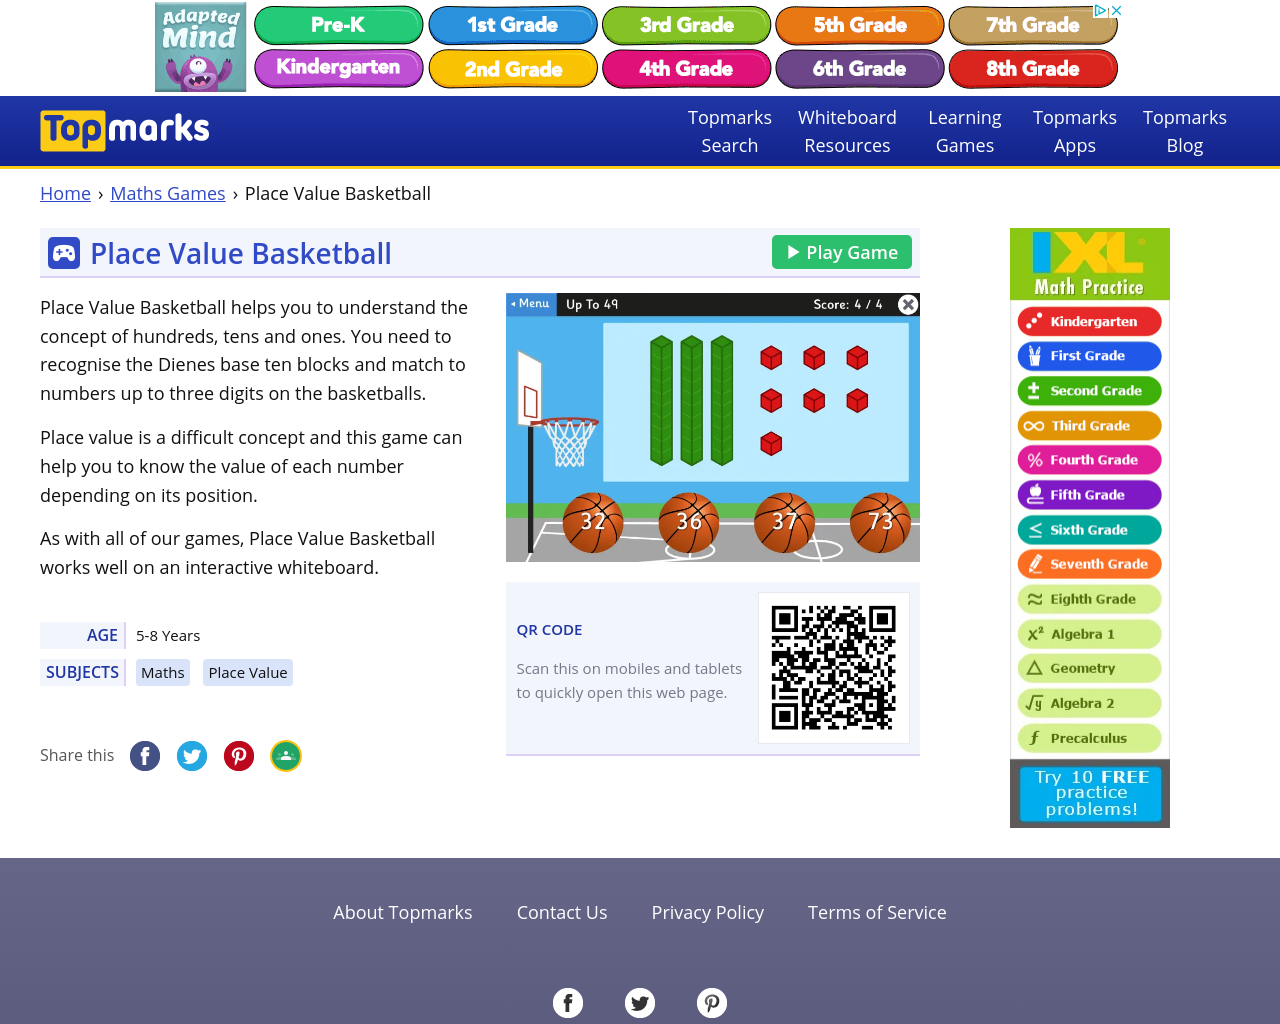 Place value basketball